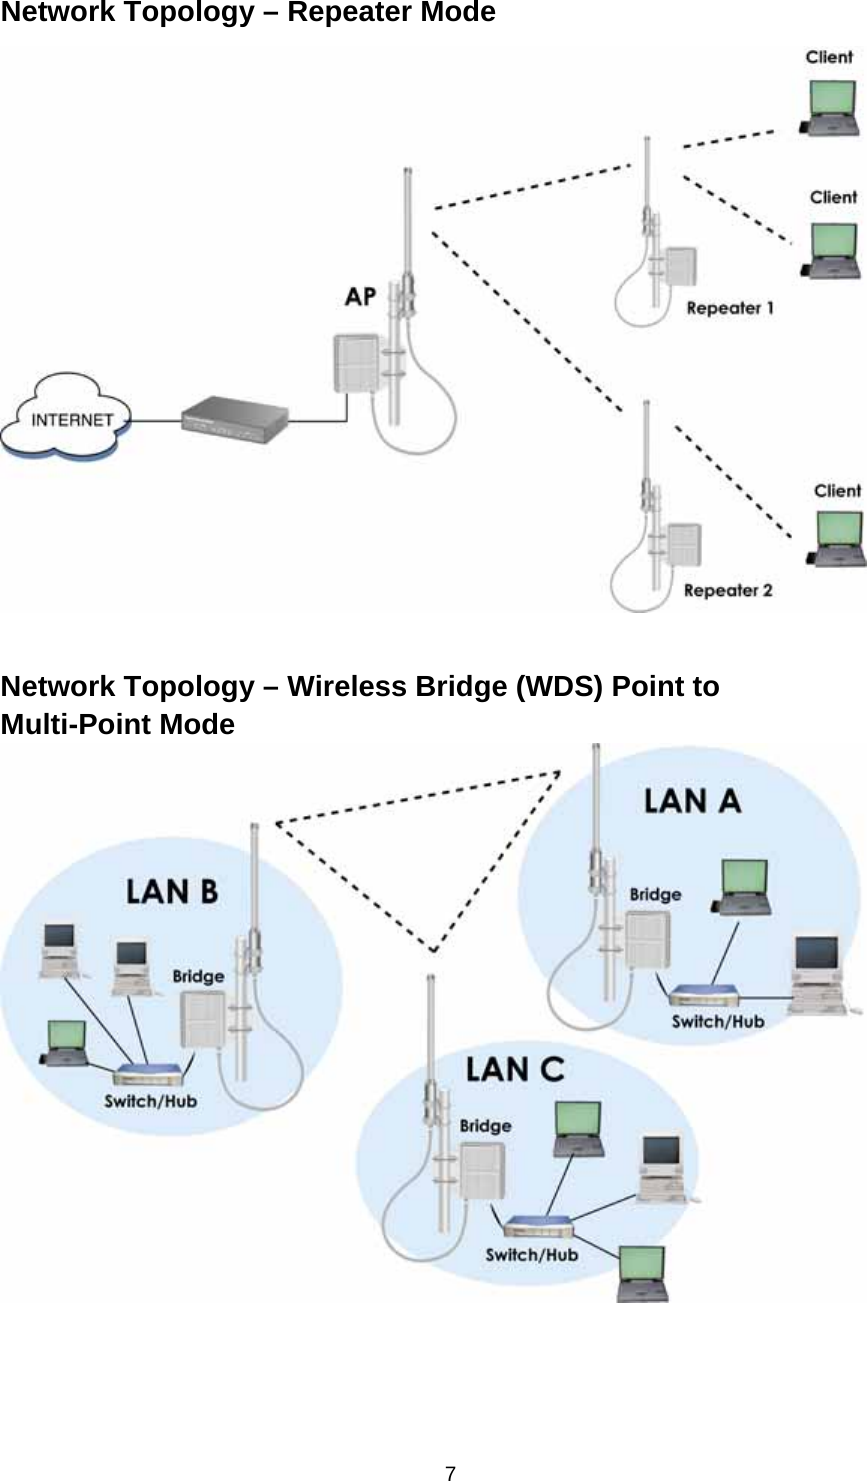  7Network Topology – Repeater Mode   Network Topology – Wireless Bridge (WDS) Point to Multi-Point Mode    